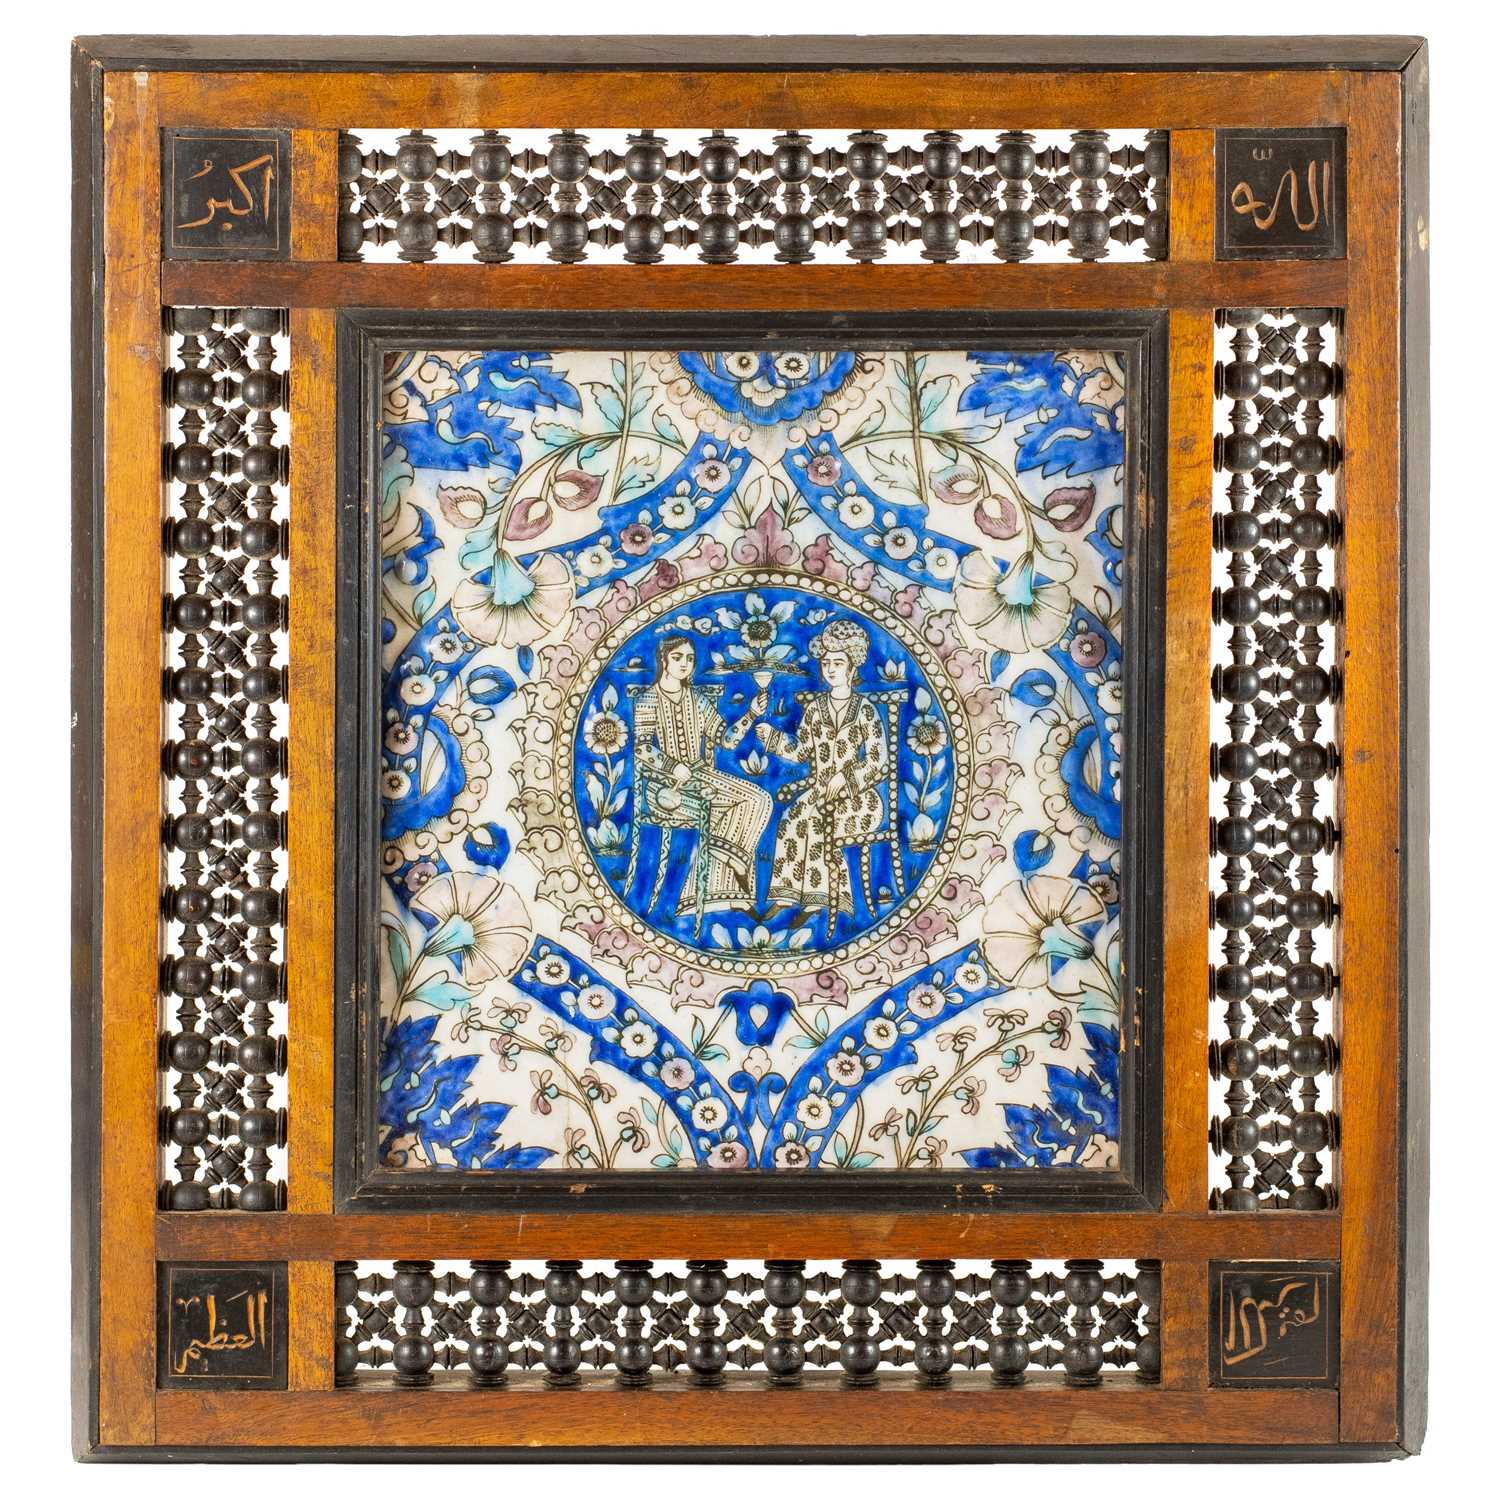 Lot 1 - A large Persian Qajar painted moulded pottery tile, 19th century.